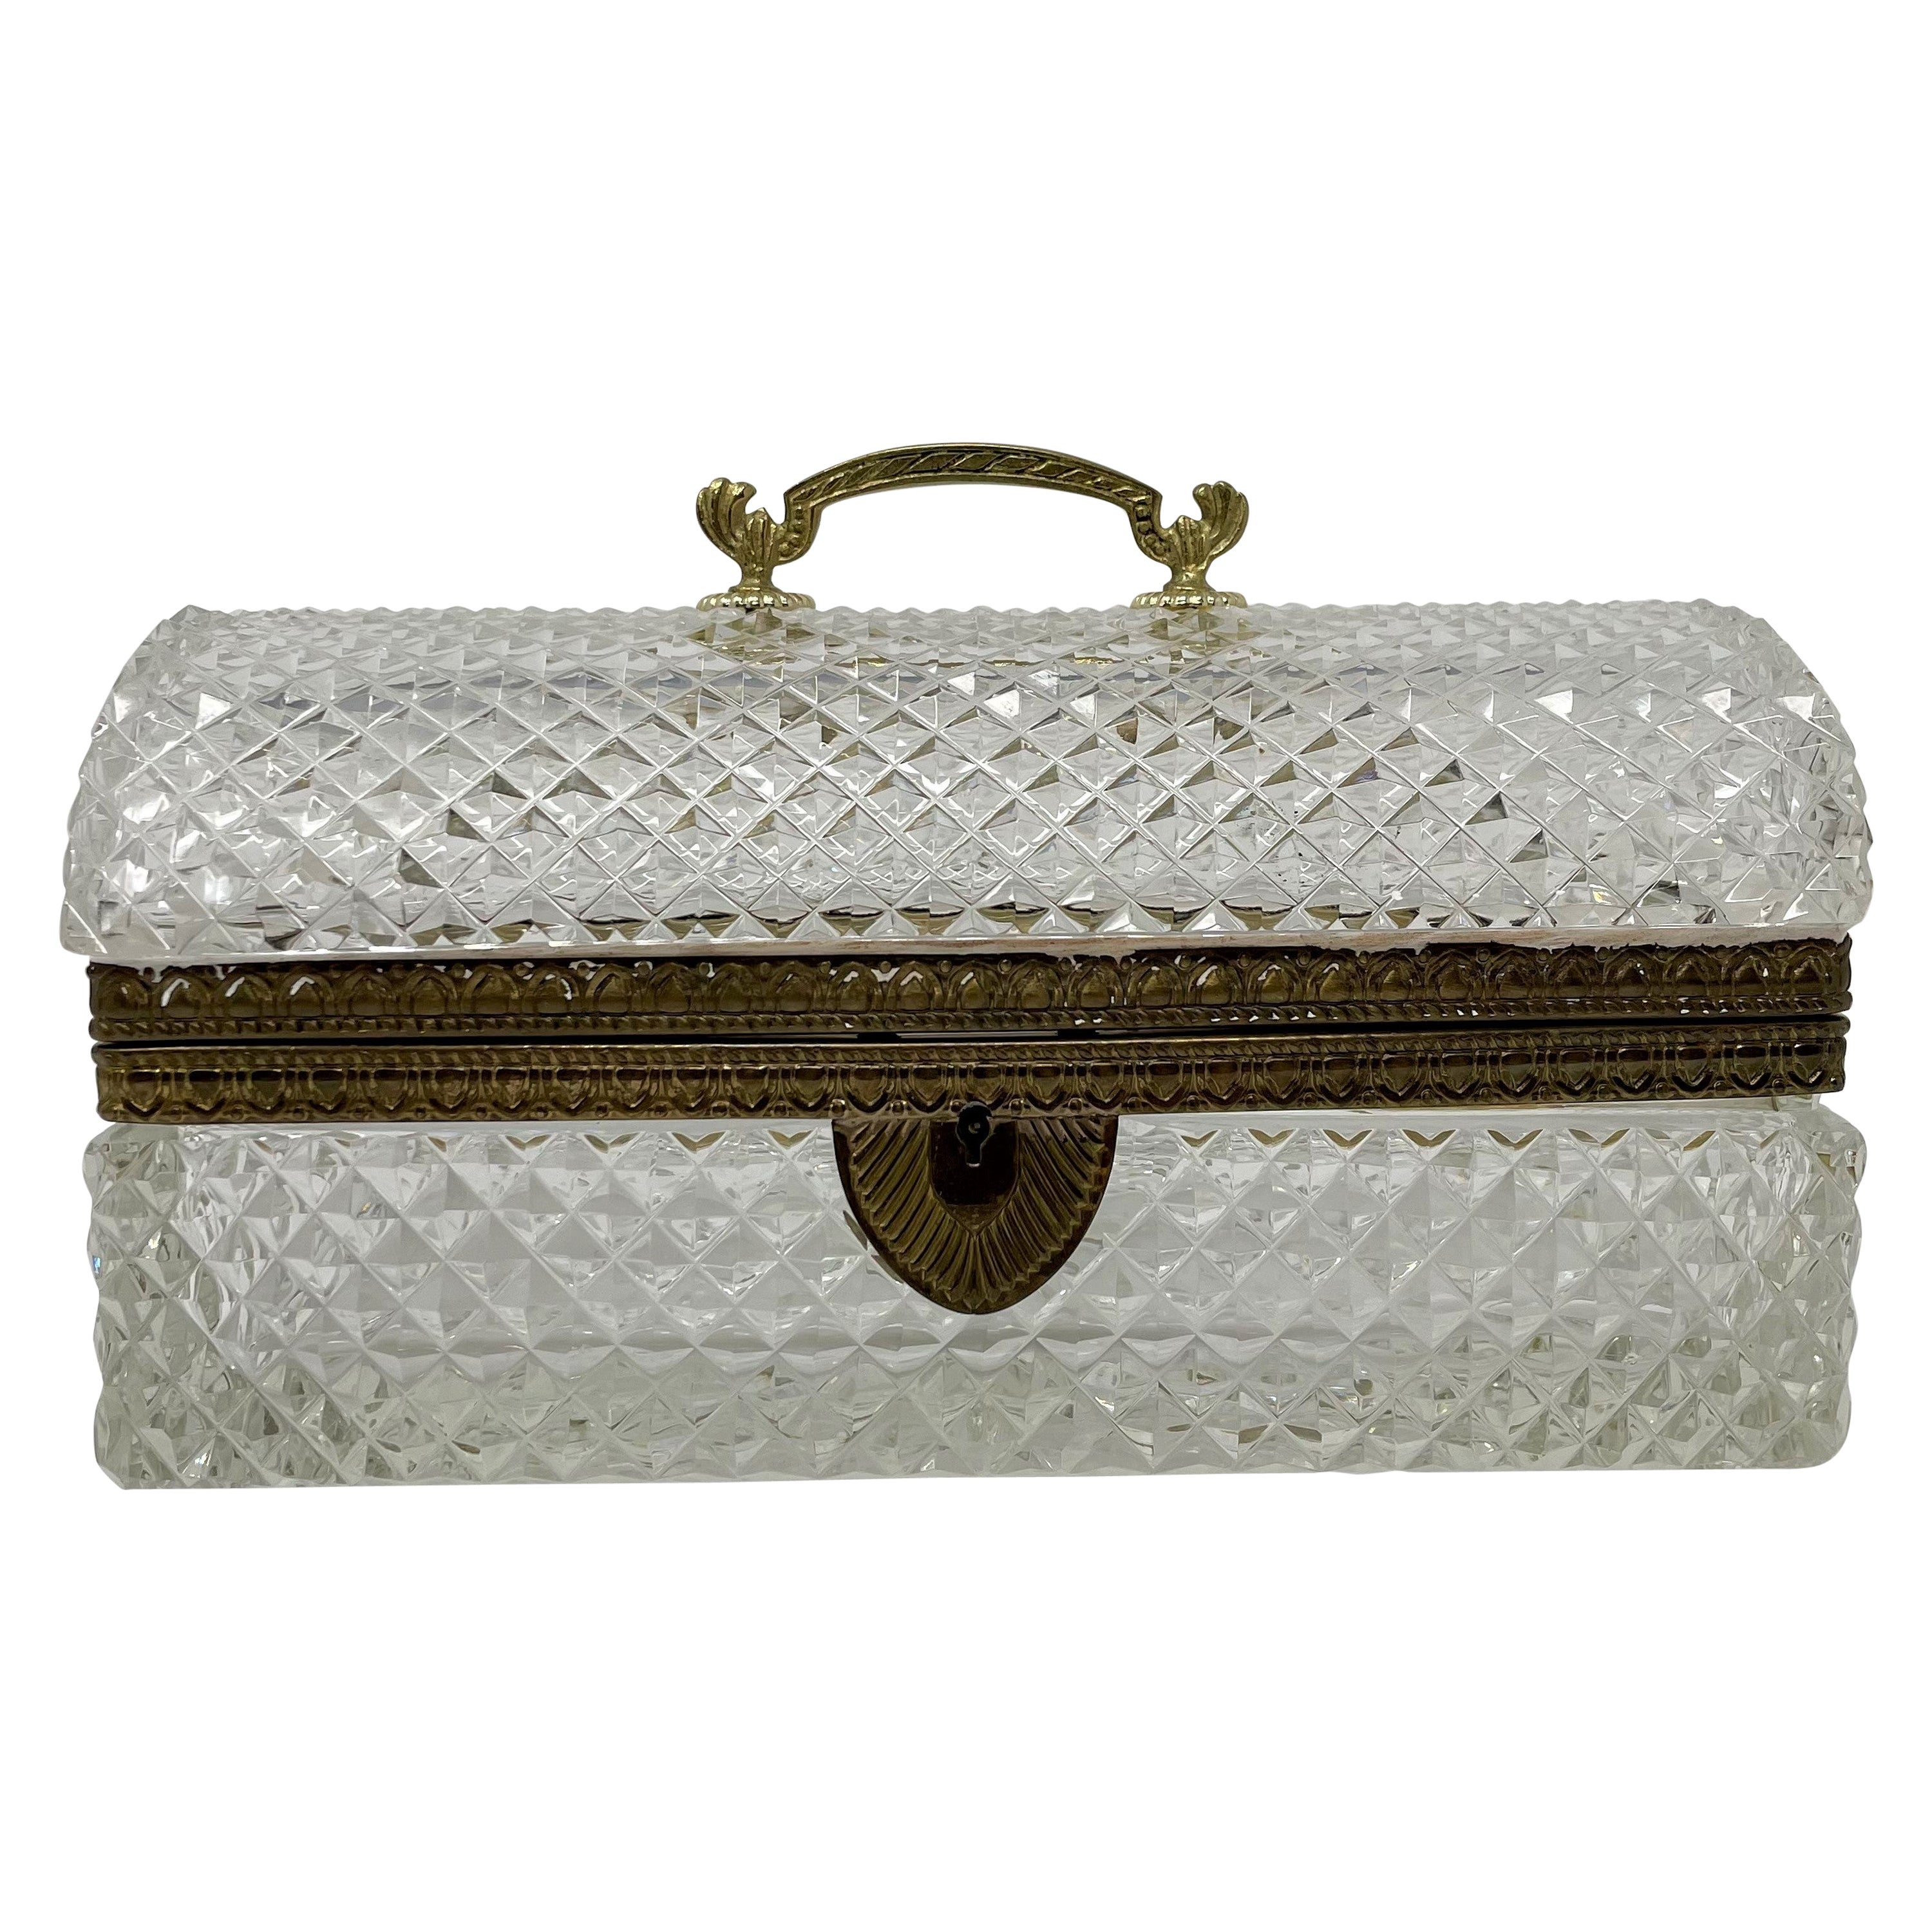 Antique French Cut Crystal Jewel Box with Bronze D'ore Mounts, Circa 1900-1920